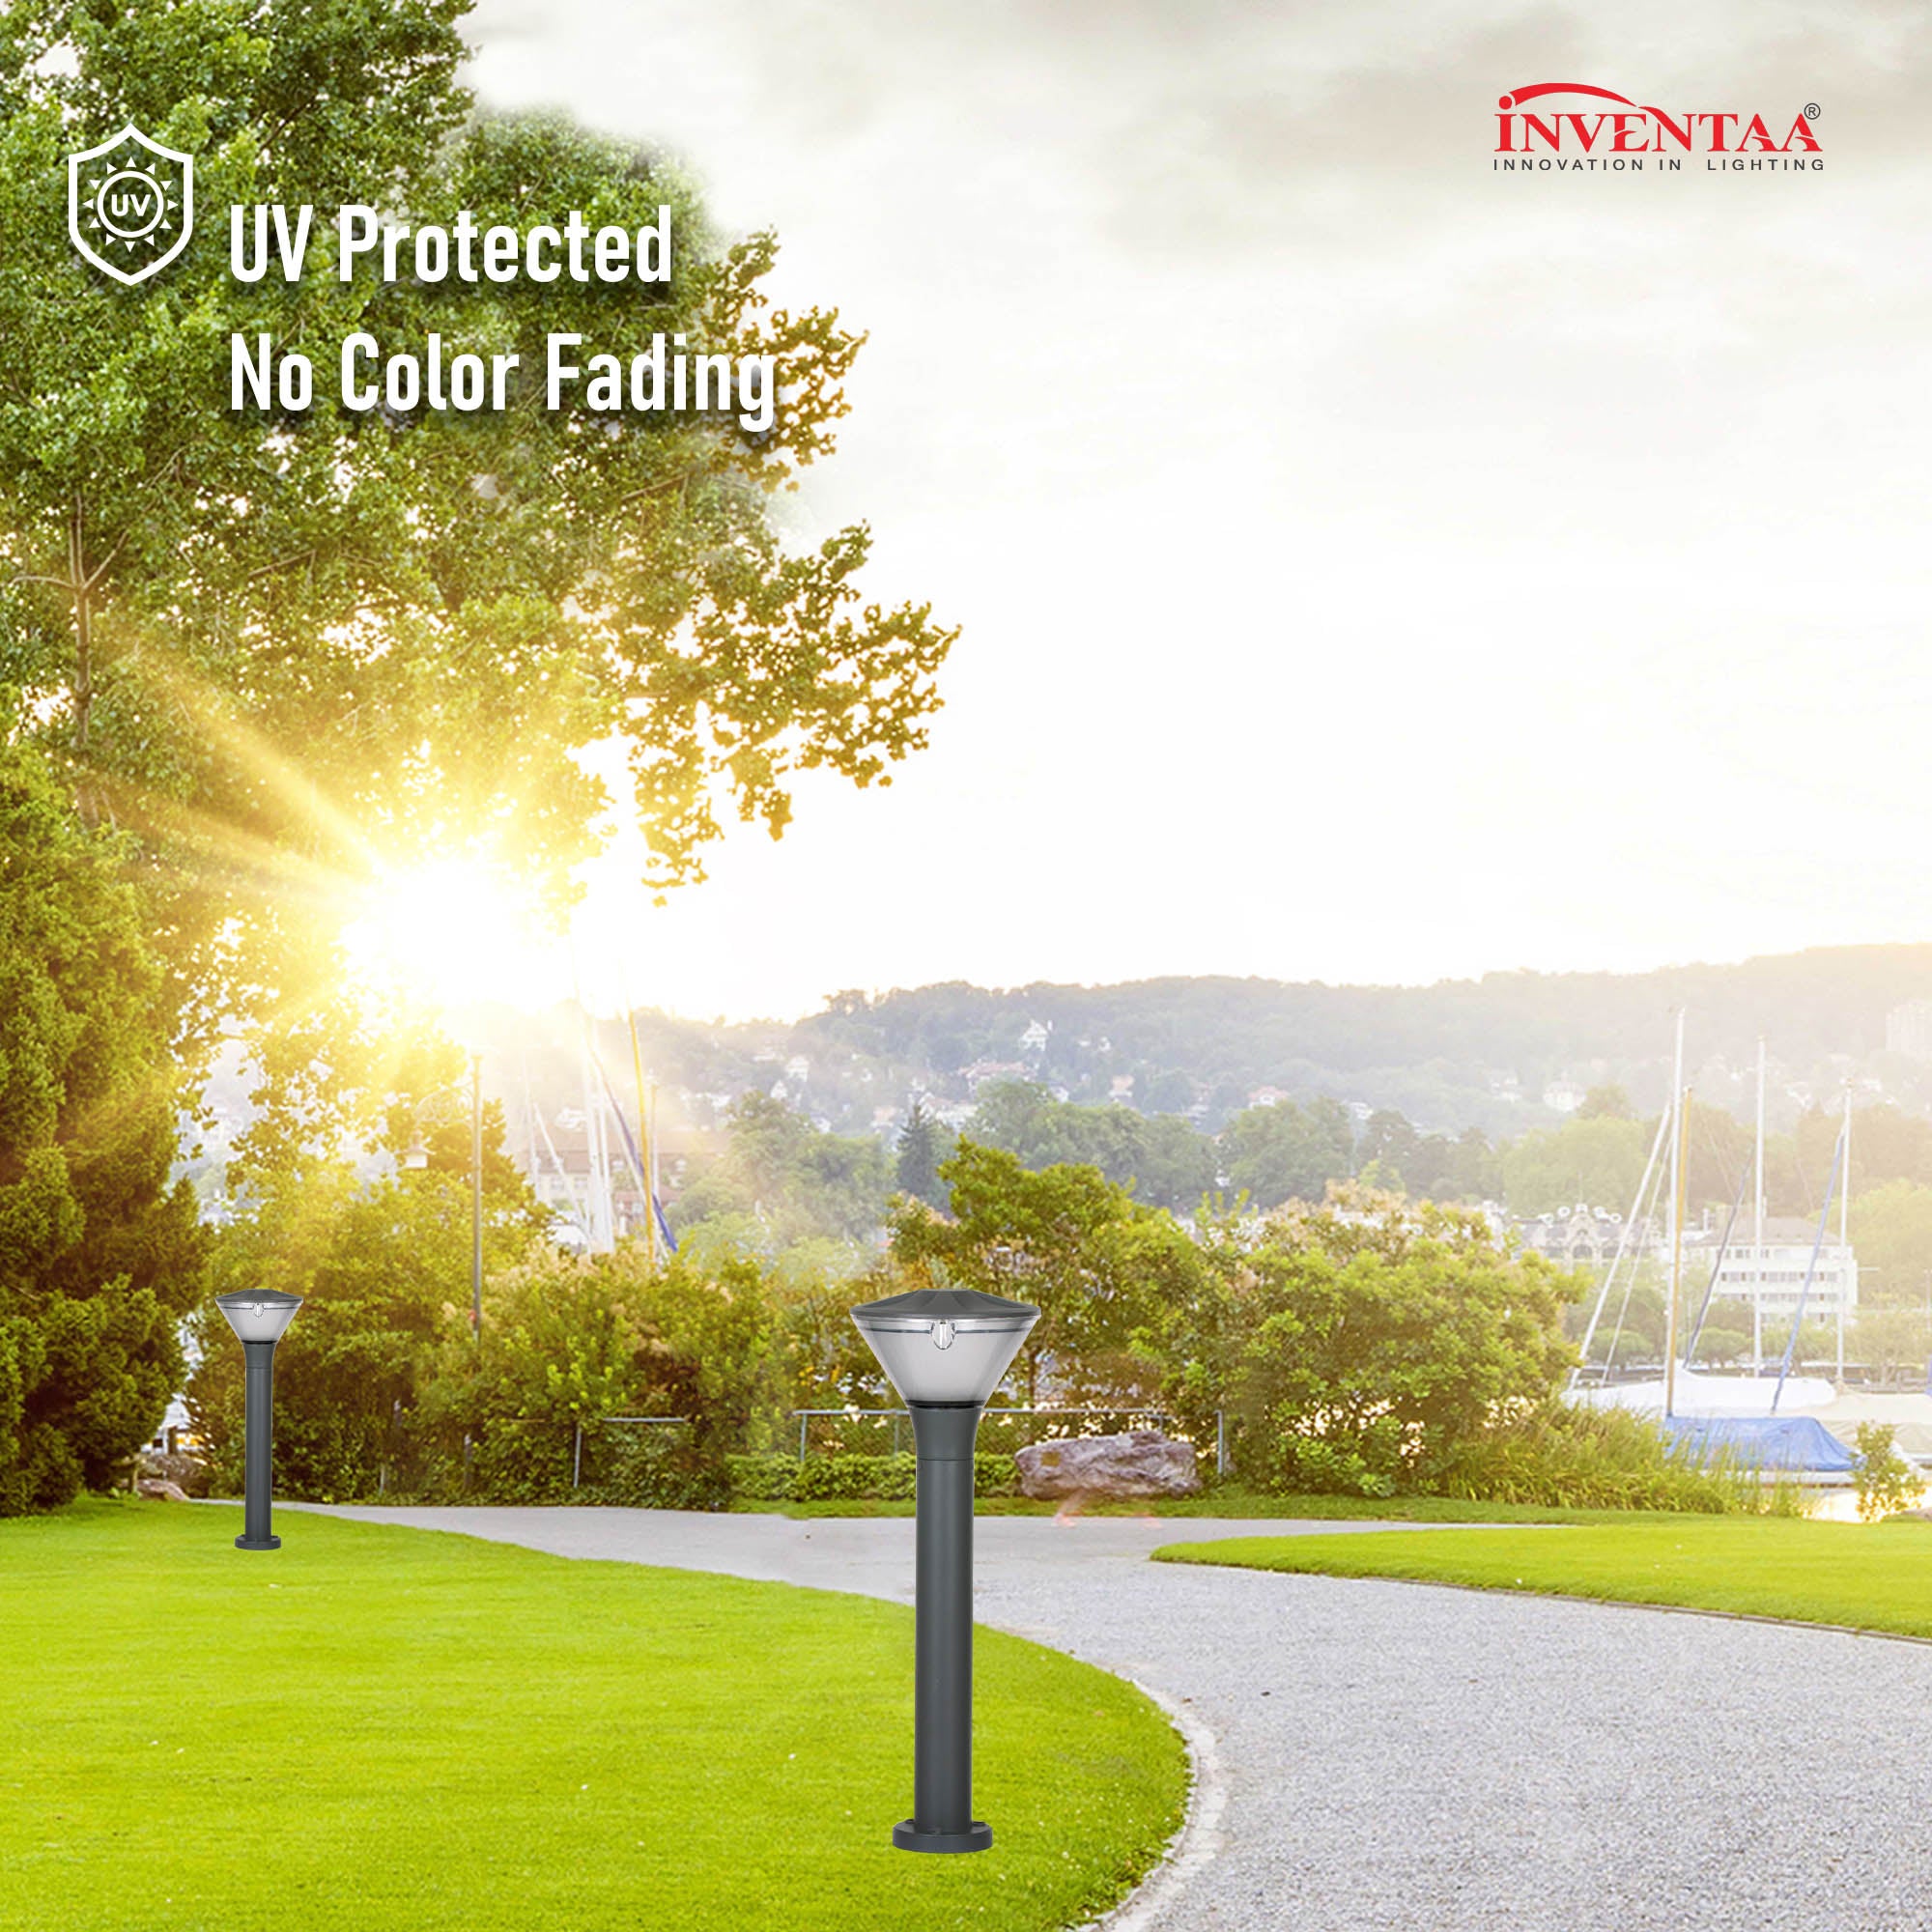 Yash 2 feet led garden bollard light featuring its UV protected and no color fading for enduring performance #size_2 feet